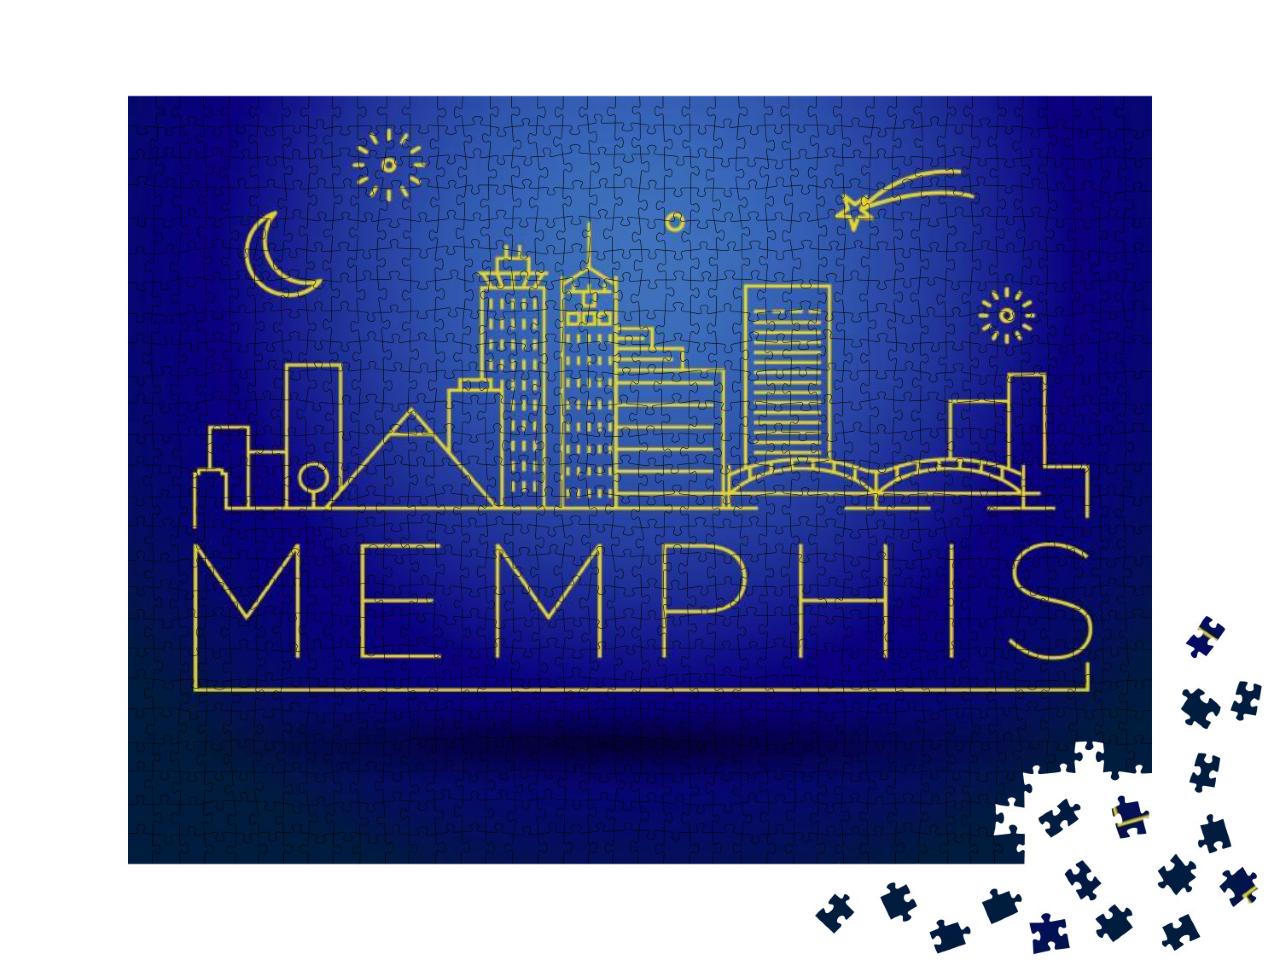 Minimal Memphis Linear City Skyline with Typographic Desi... Jigsaw Puzzle with 1000 pieces